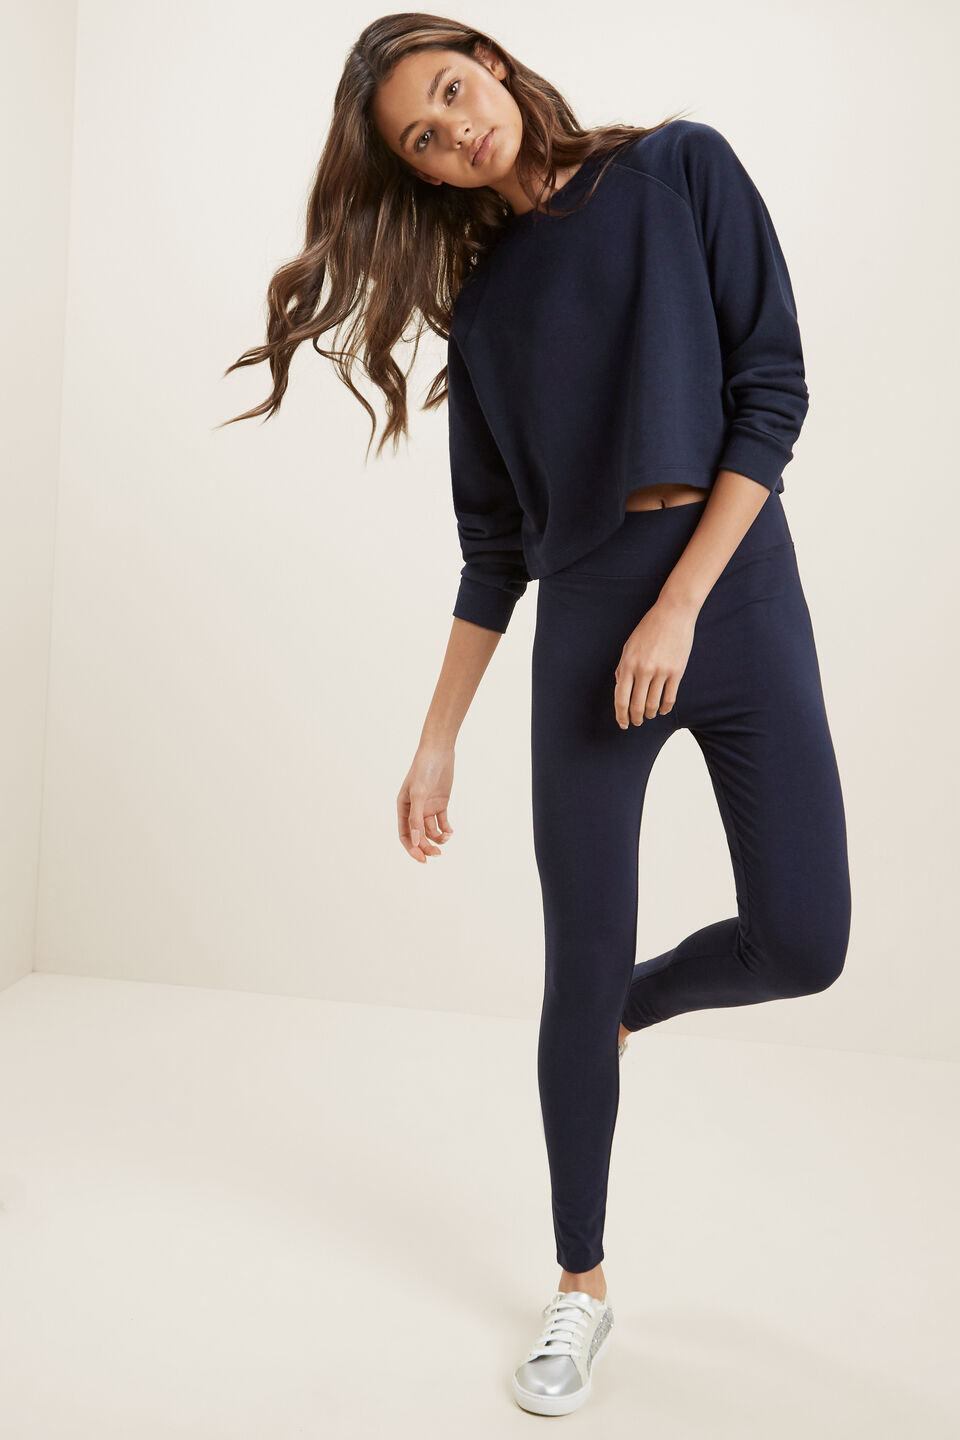 Cropped Sweater  Midnight Blue